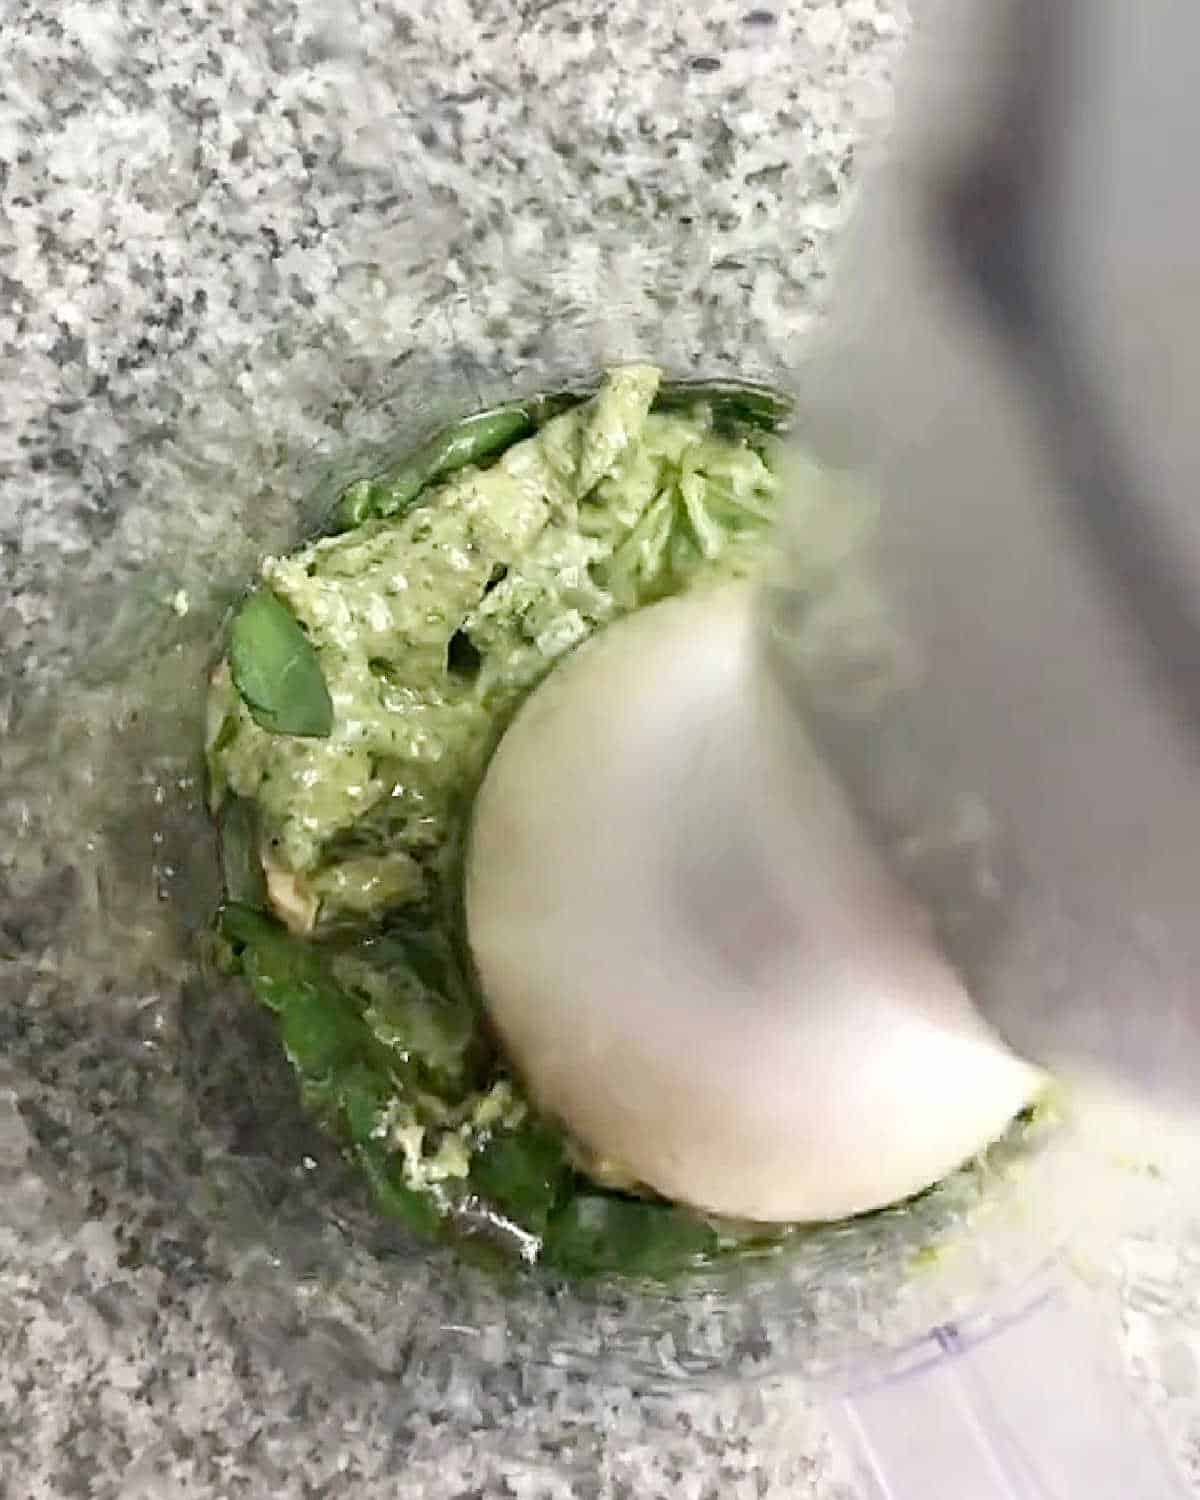 Processing salsa verde with immersion blender in a glass jar on grey granite surface.